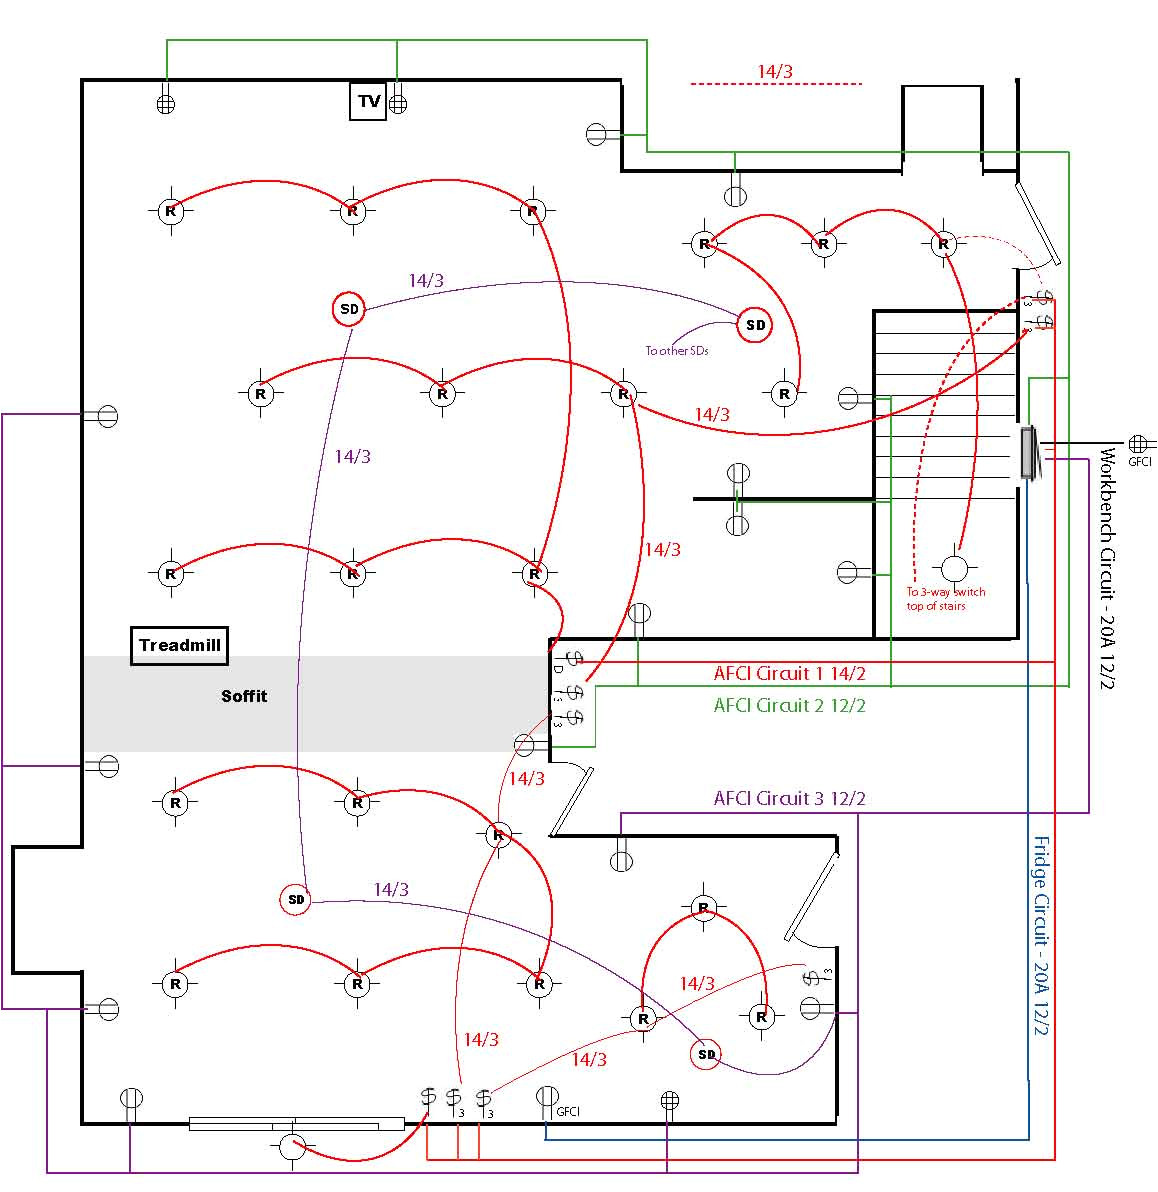 home wiring plans